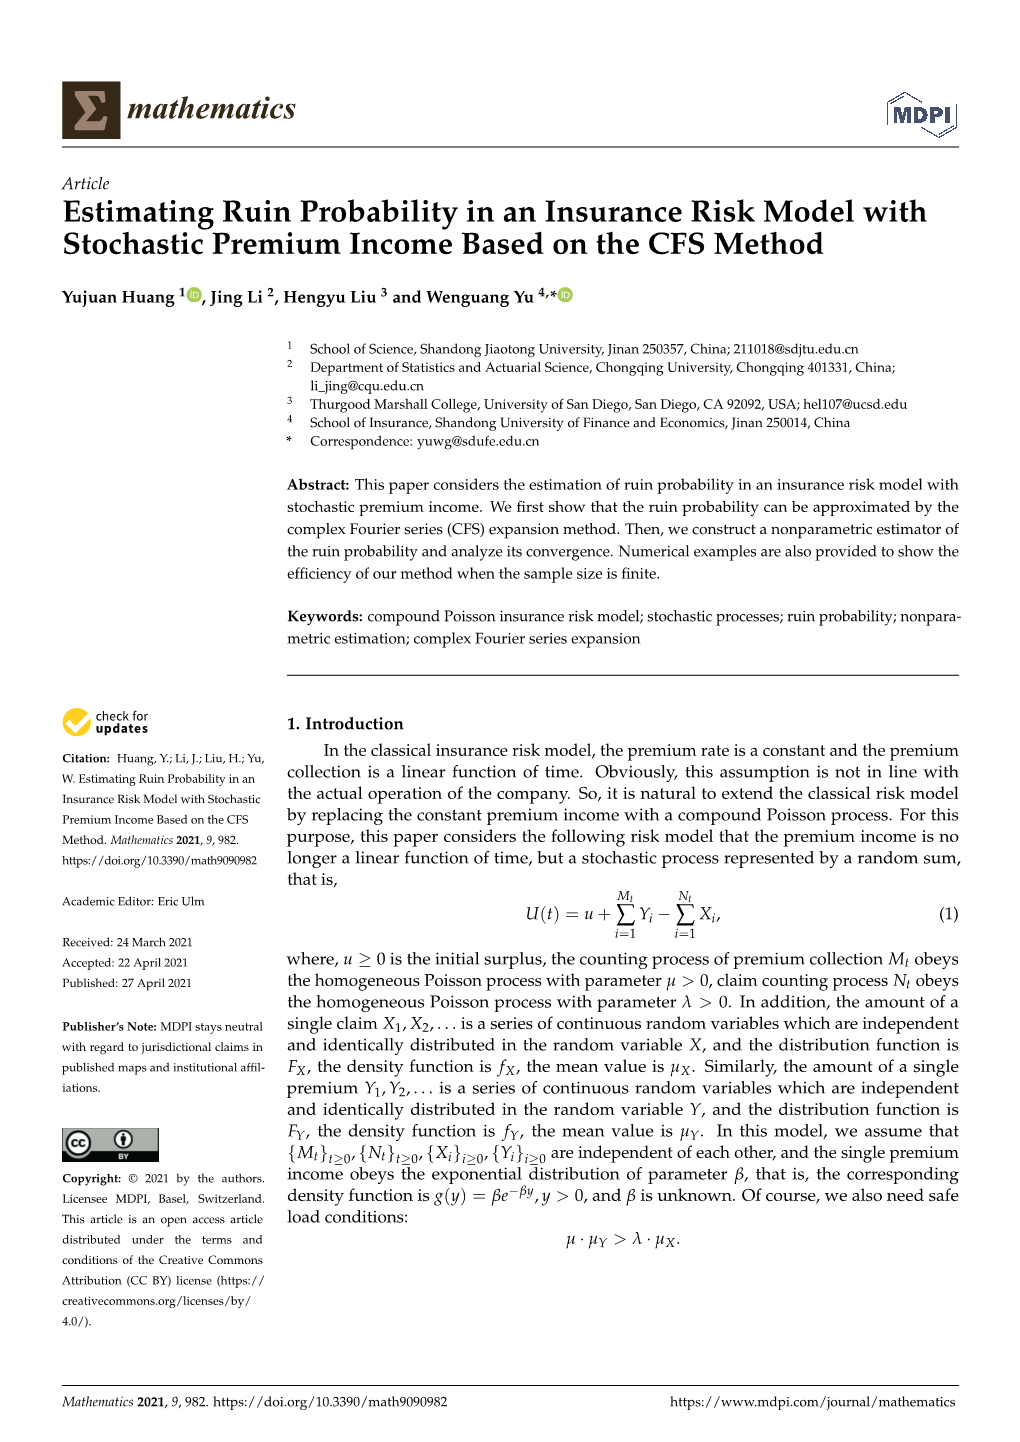 Estimating Ruin Probability in an Insurance Risk Model with Stochastic Premium Income Based on the CFS Method